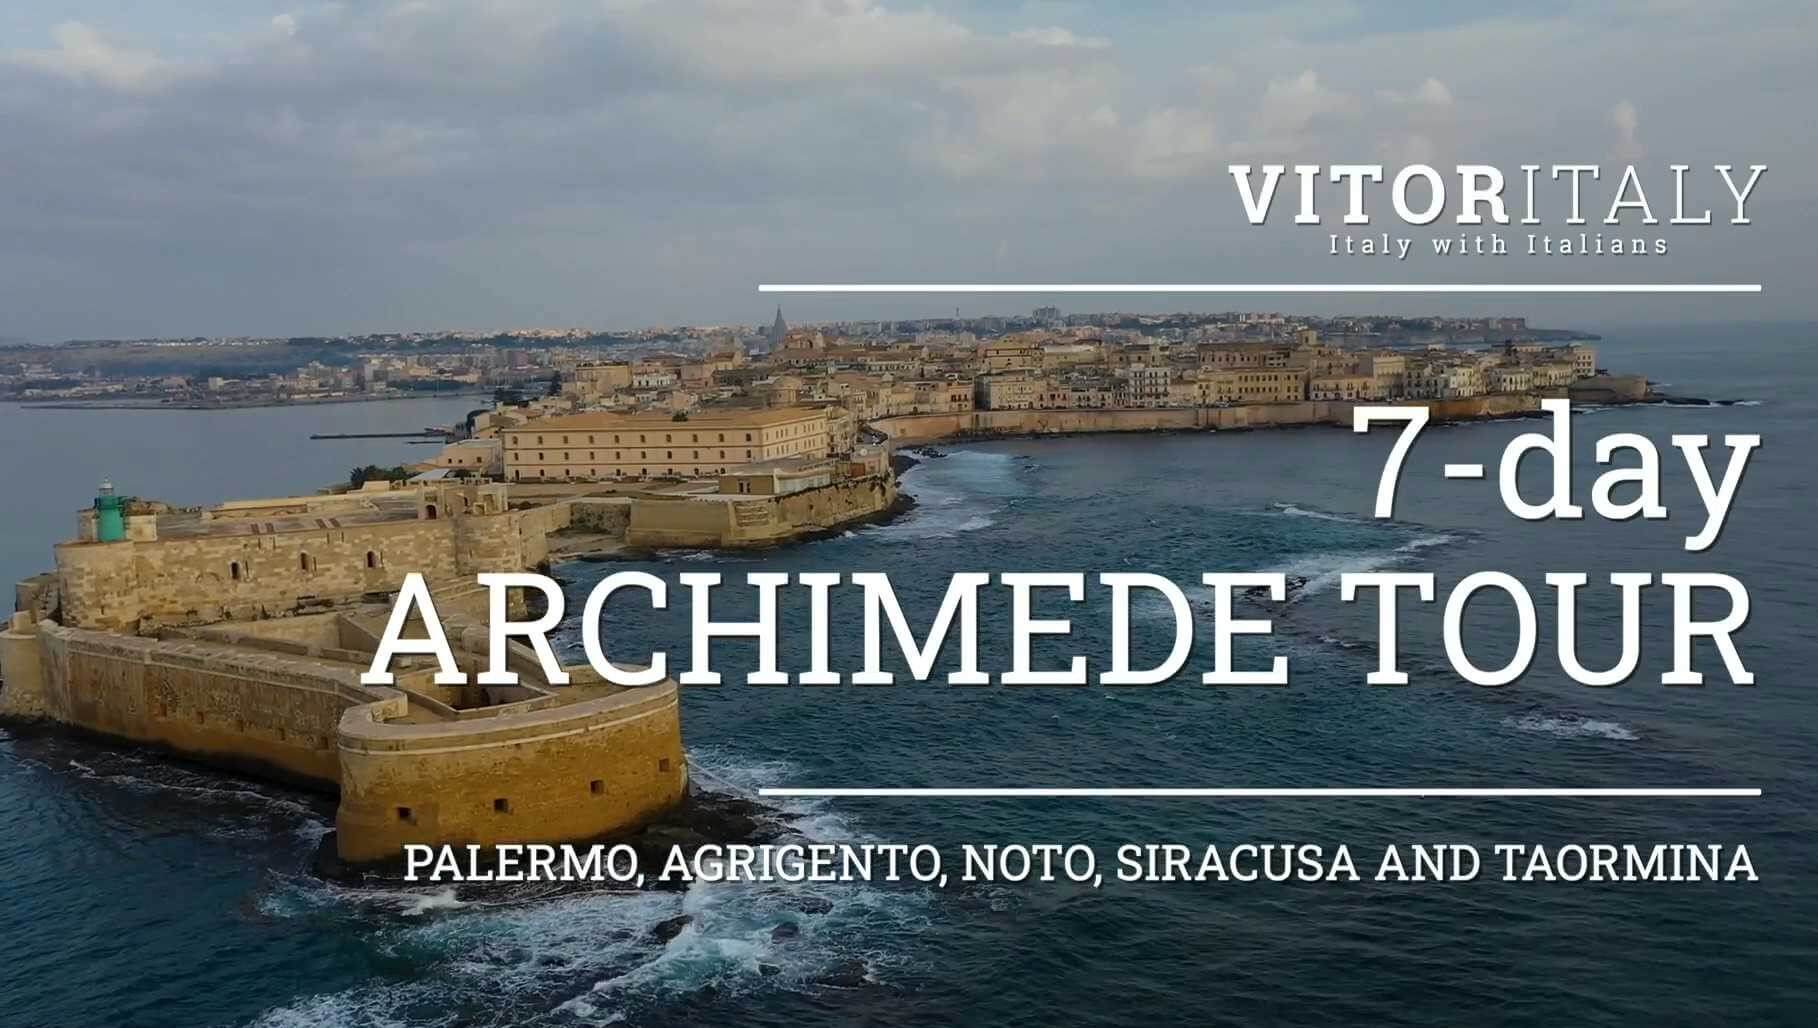 ARCHIMEDE TOUR - Palermo, Agrigento, Noto, Siracusa and Taormina  in 1 Week